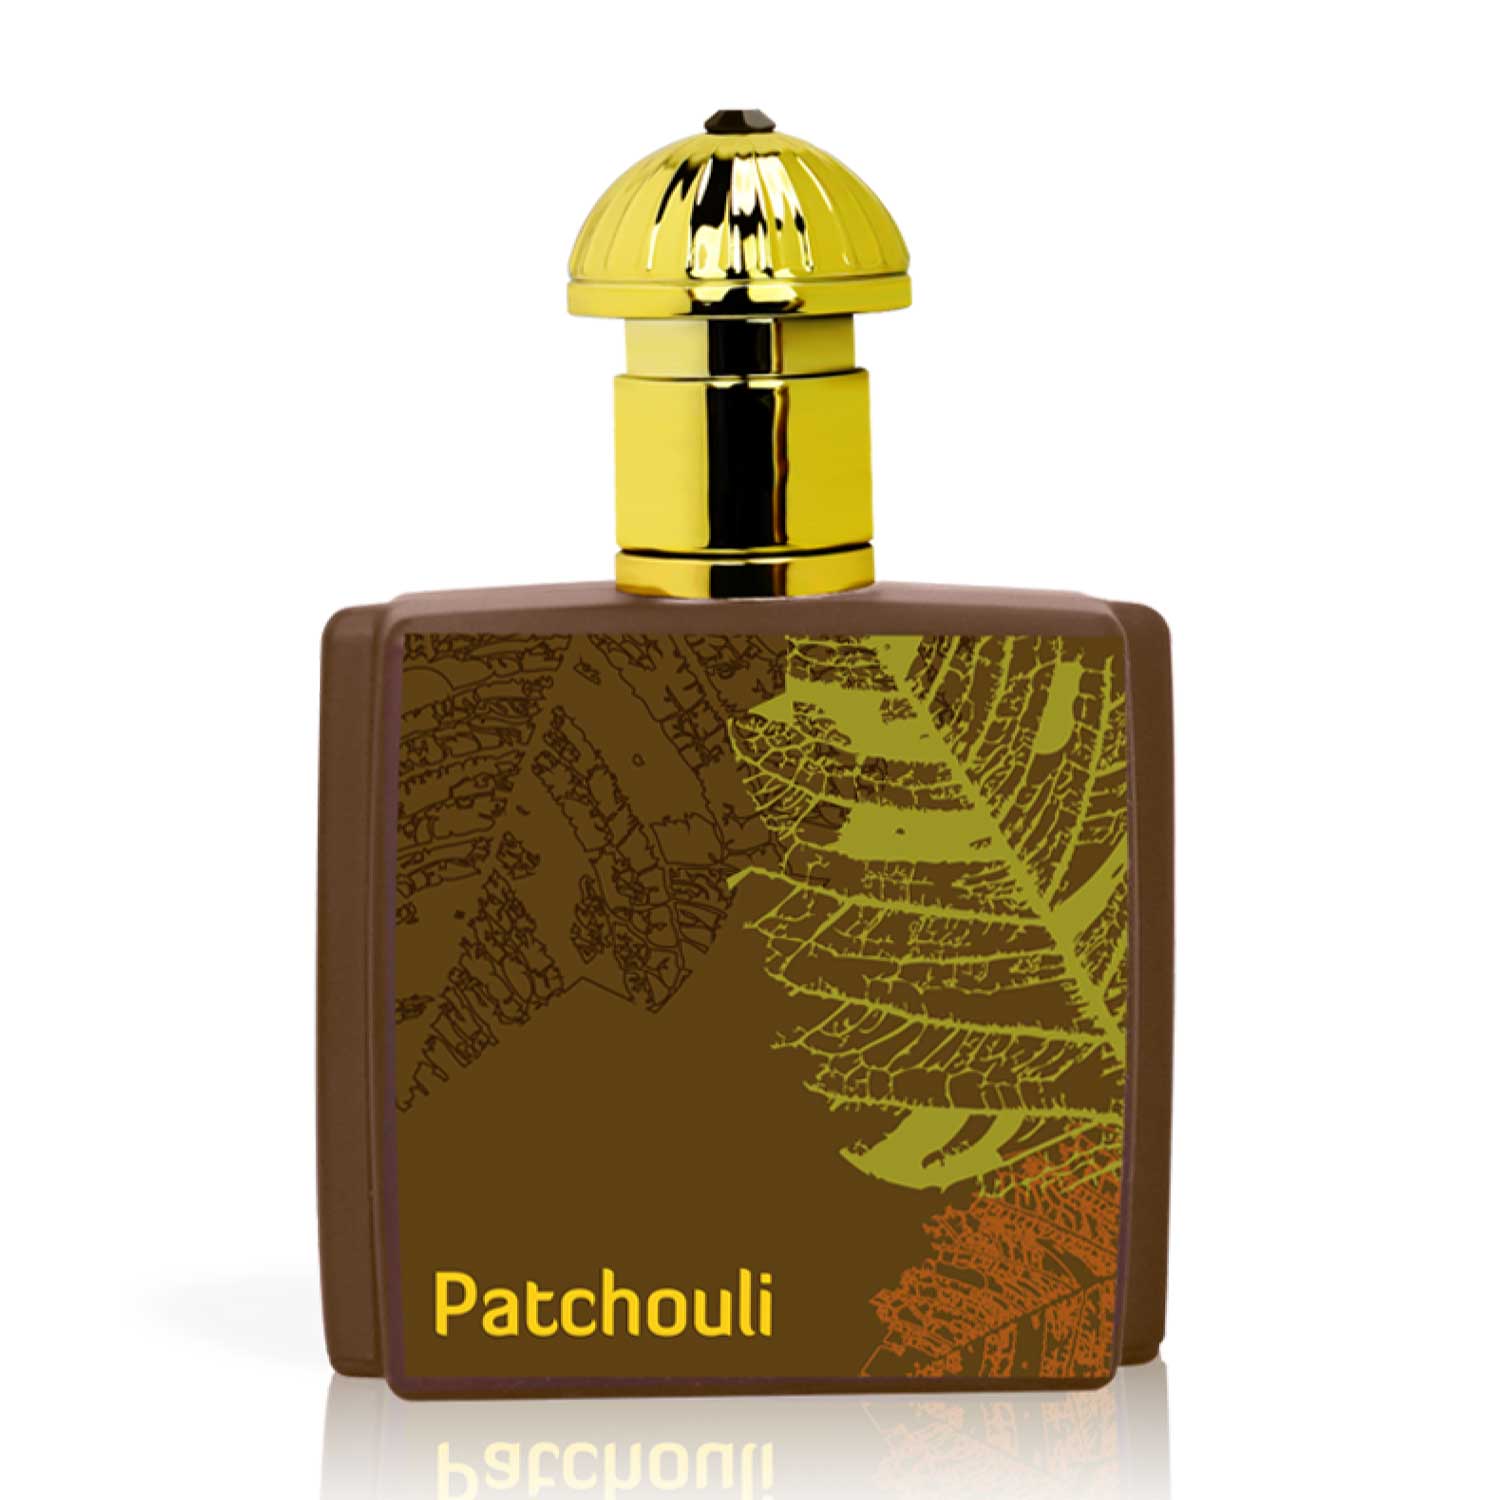 PATCHOULI EDP - 50 ML Unisex Fragrance and Cologne for Men by